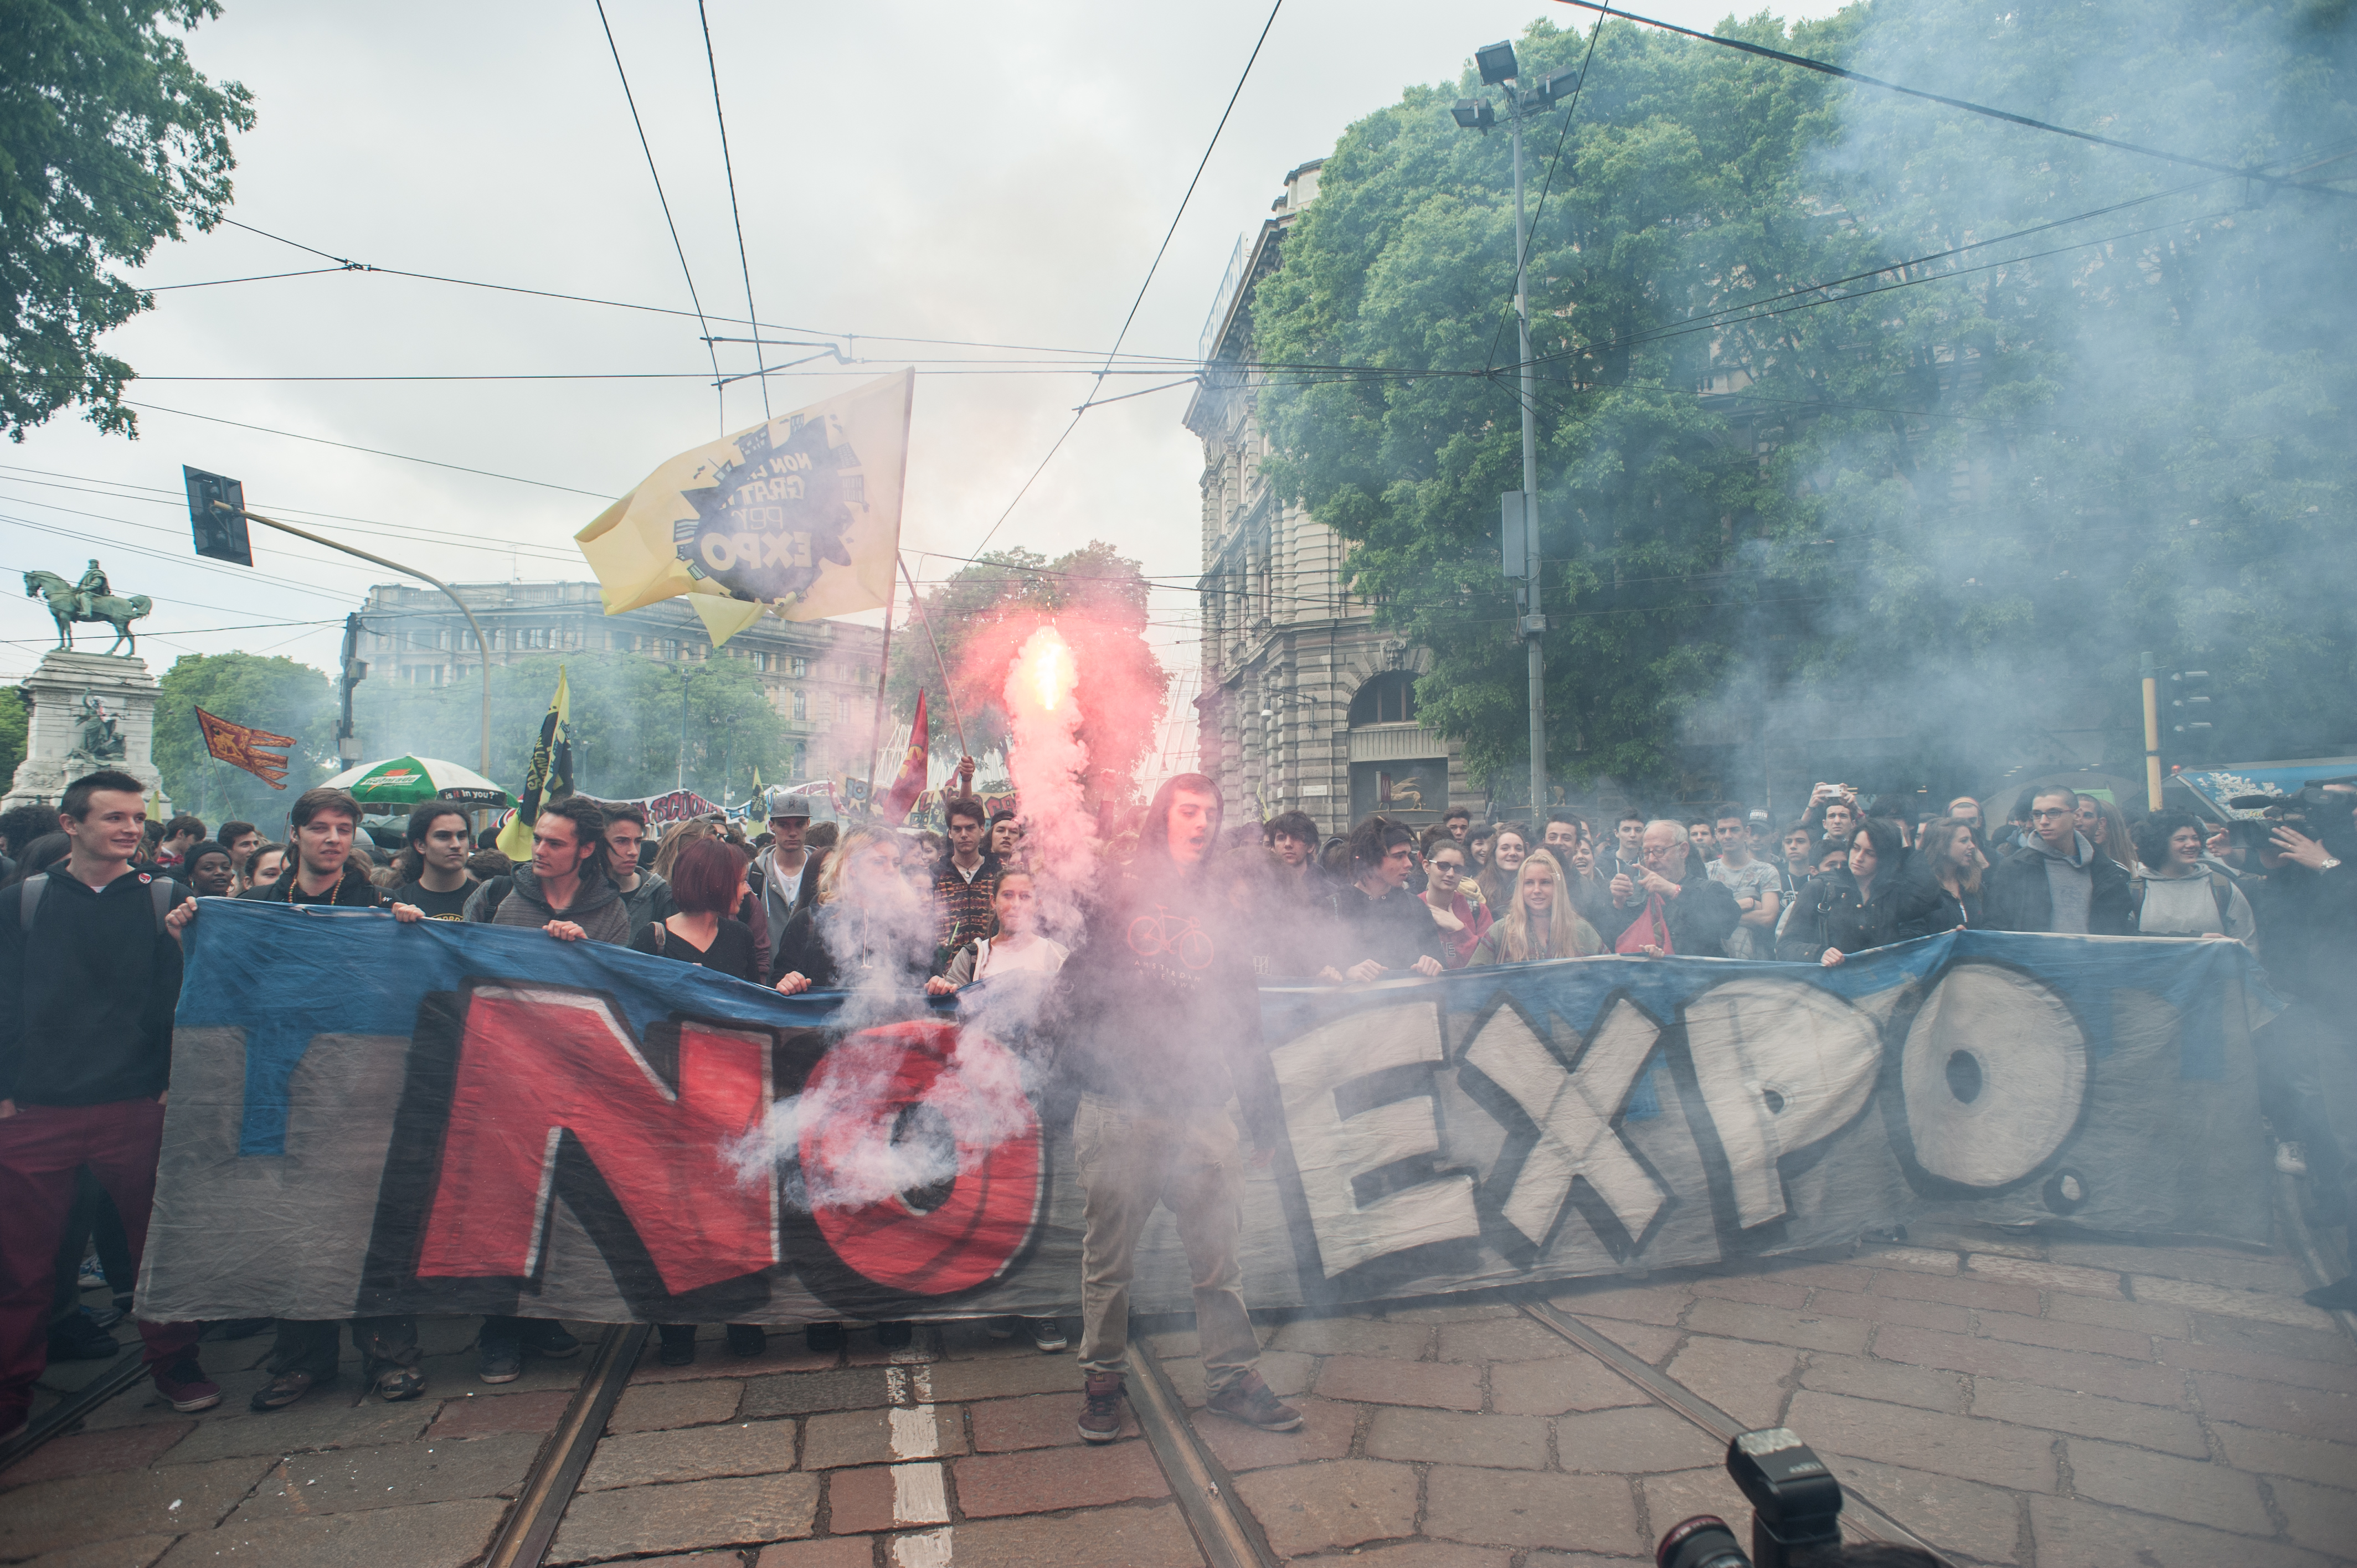 Anti-Expo march in Milan city centre. Photo taken on 30 April 2015 by Marco Aprile. Copyright Demotix.